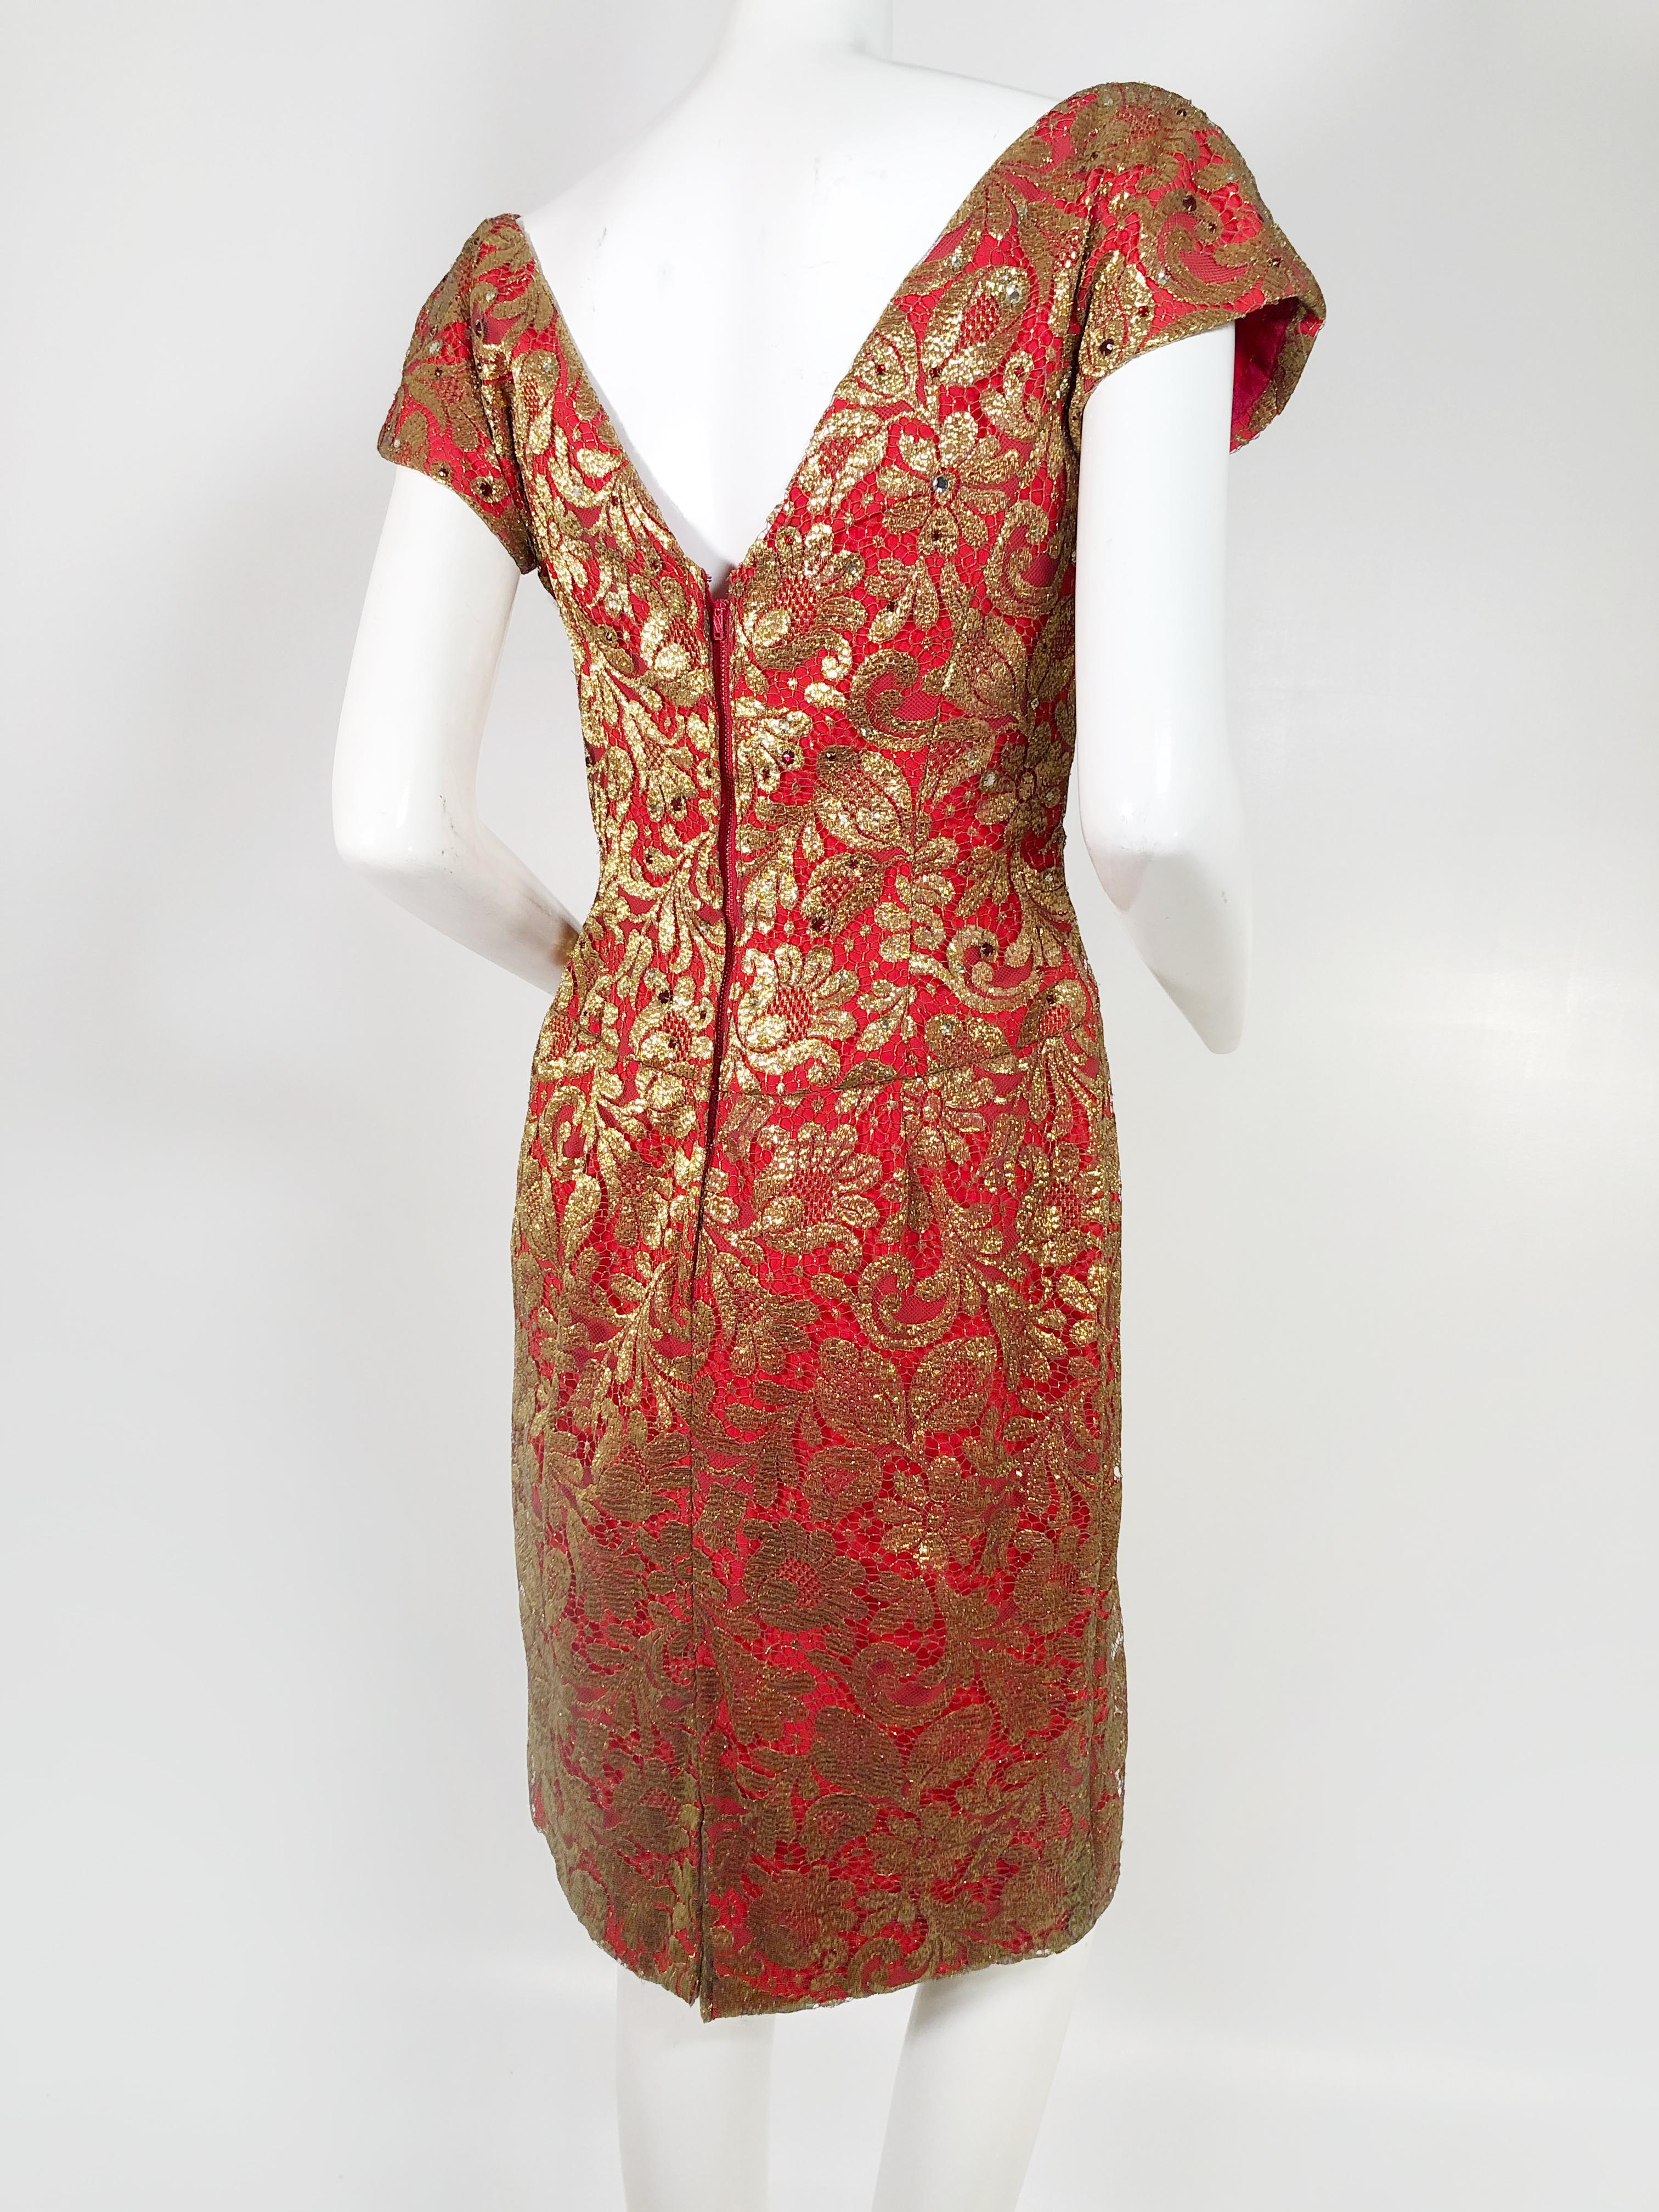 1950s Red Sheath Dress with Beautiful Gold Lame Lace Overlay and ...